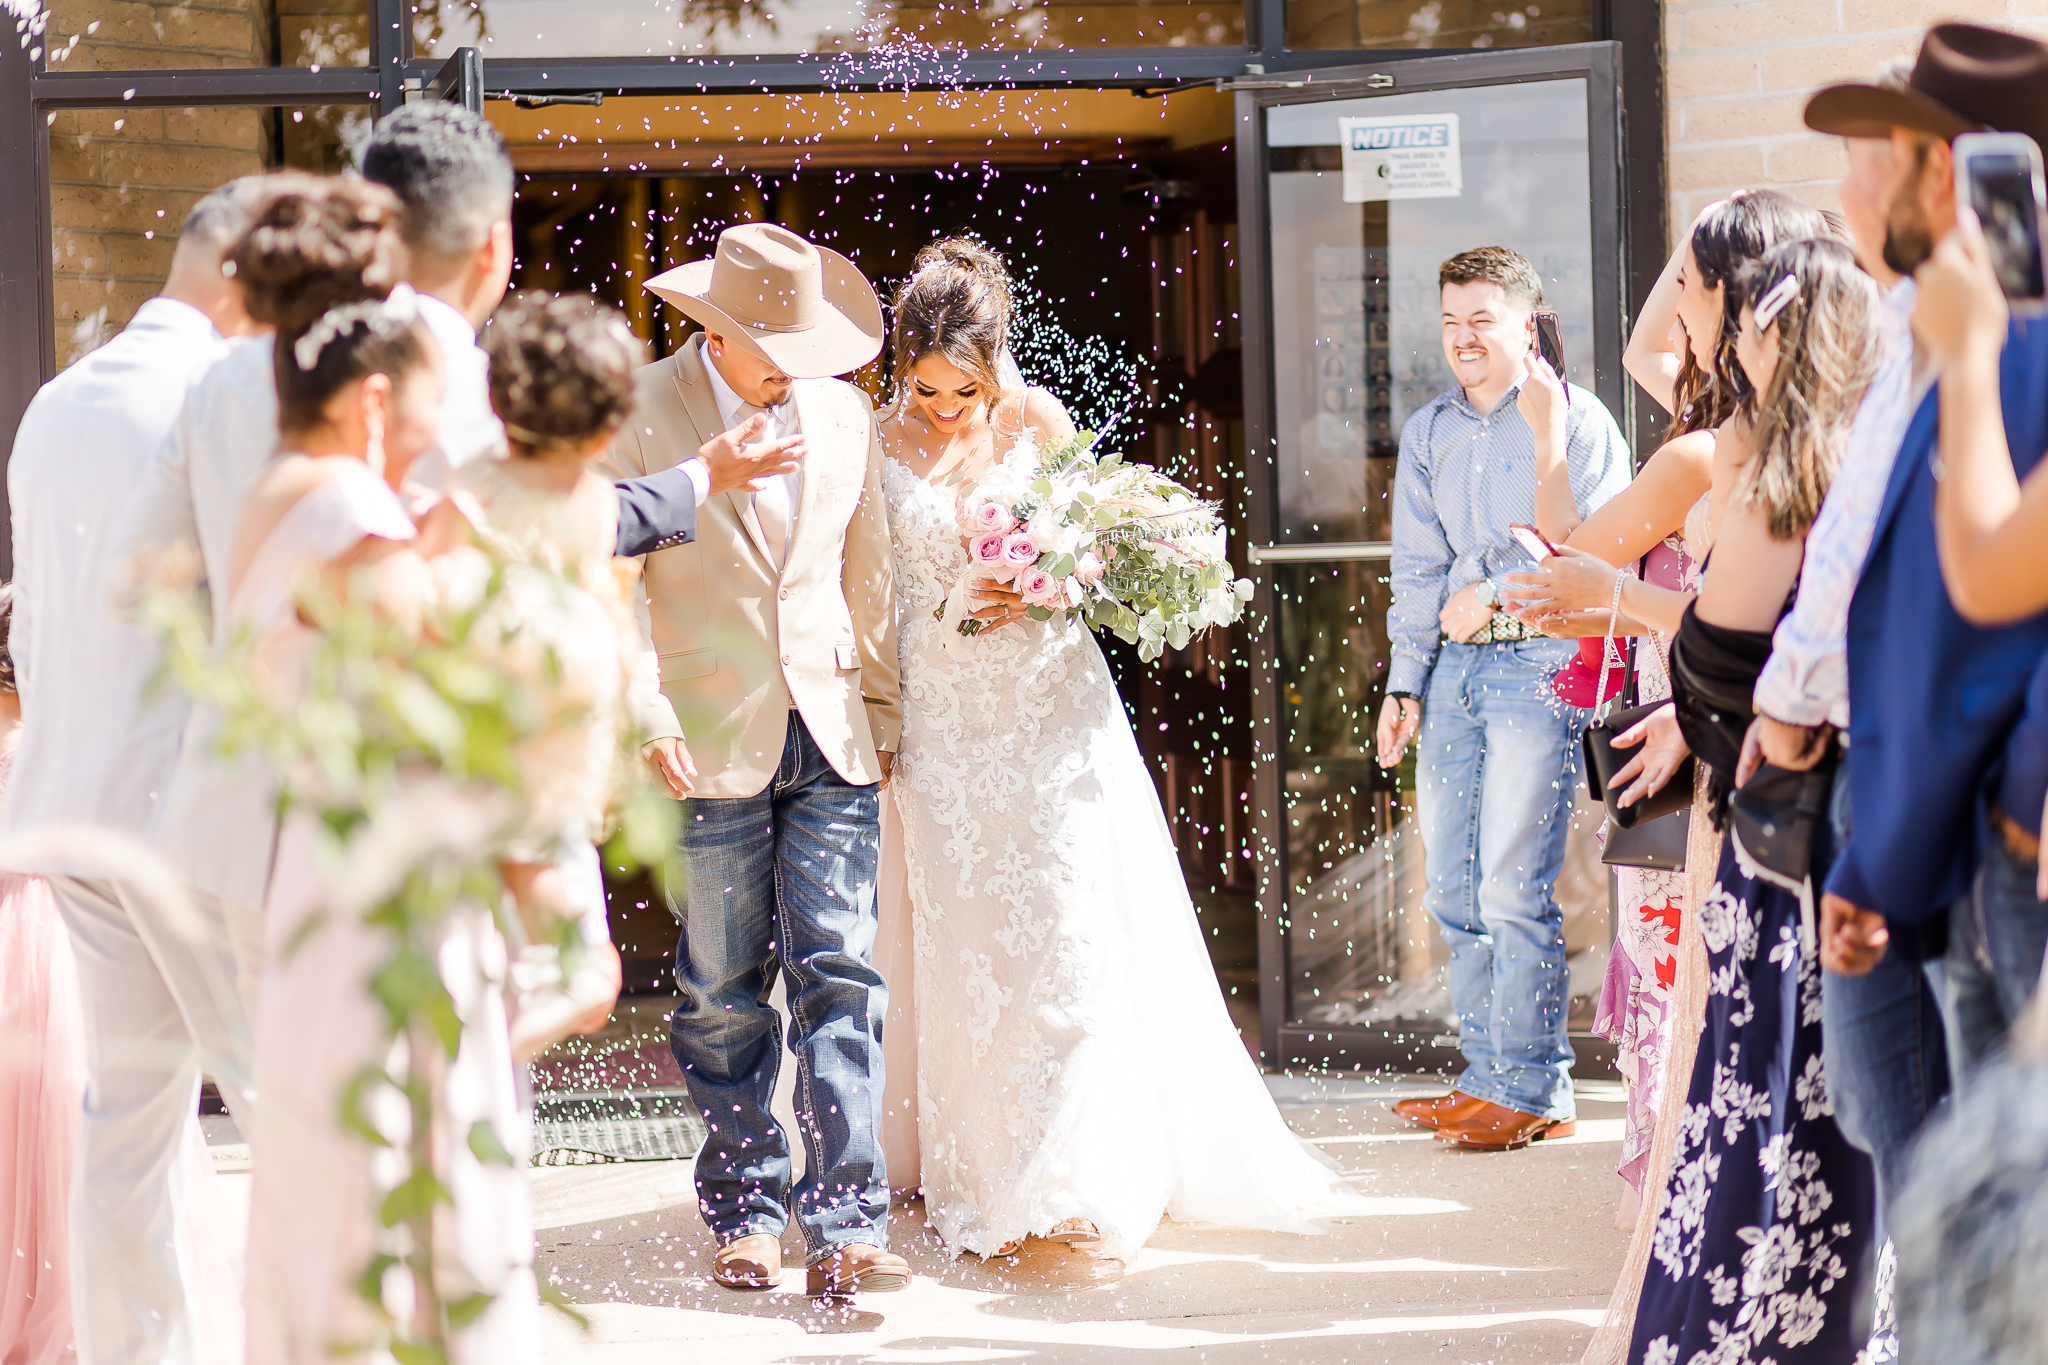 rice exit, grand exit, west TX summer wedding, dallas wedding photographer, couple smiling, just married 